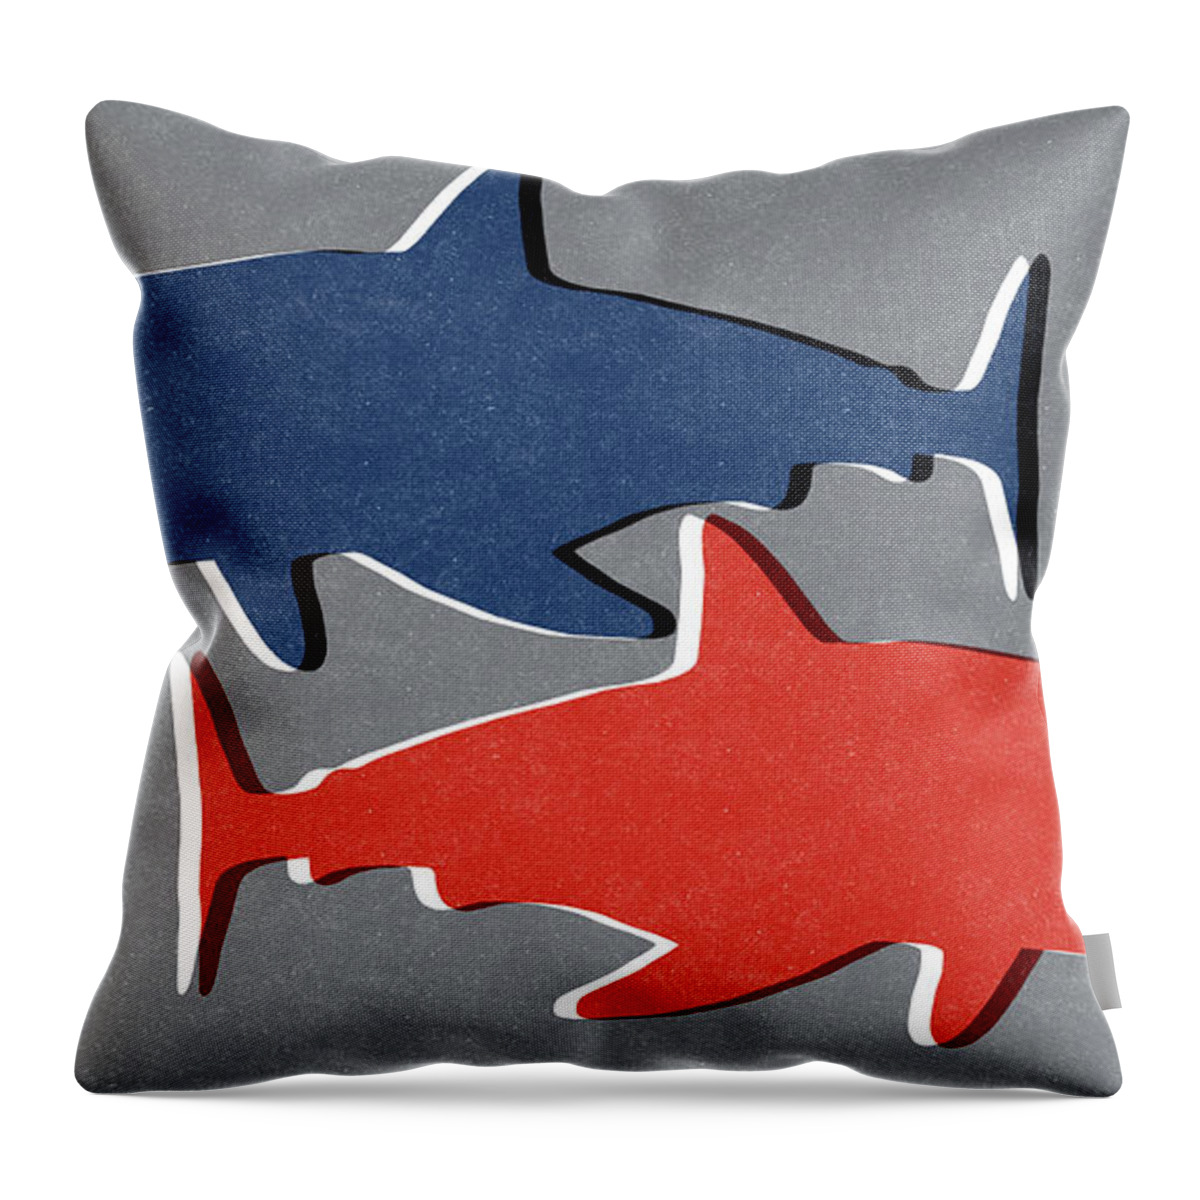 Shark Throw Pillow featuring the mixed media Blue and Red Sharks by Linda Woods